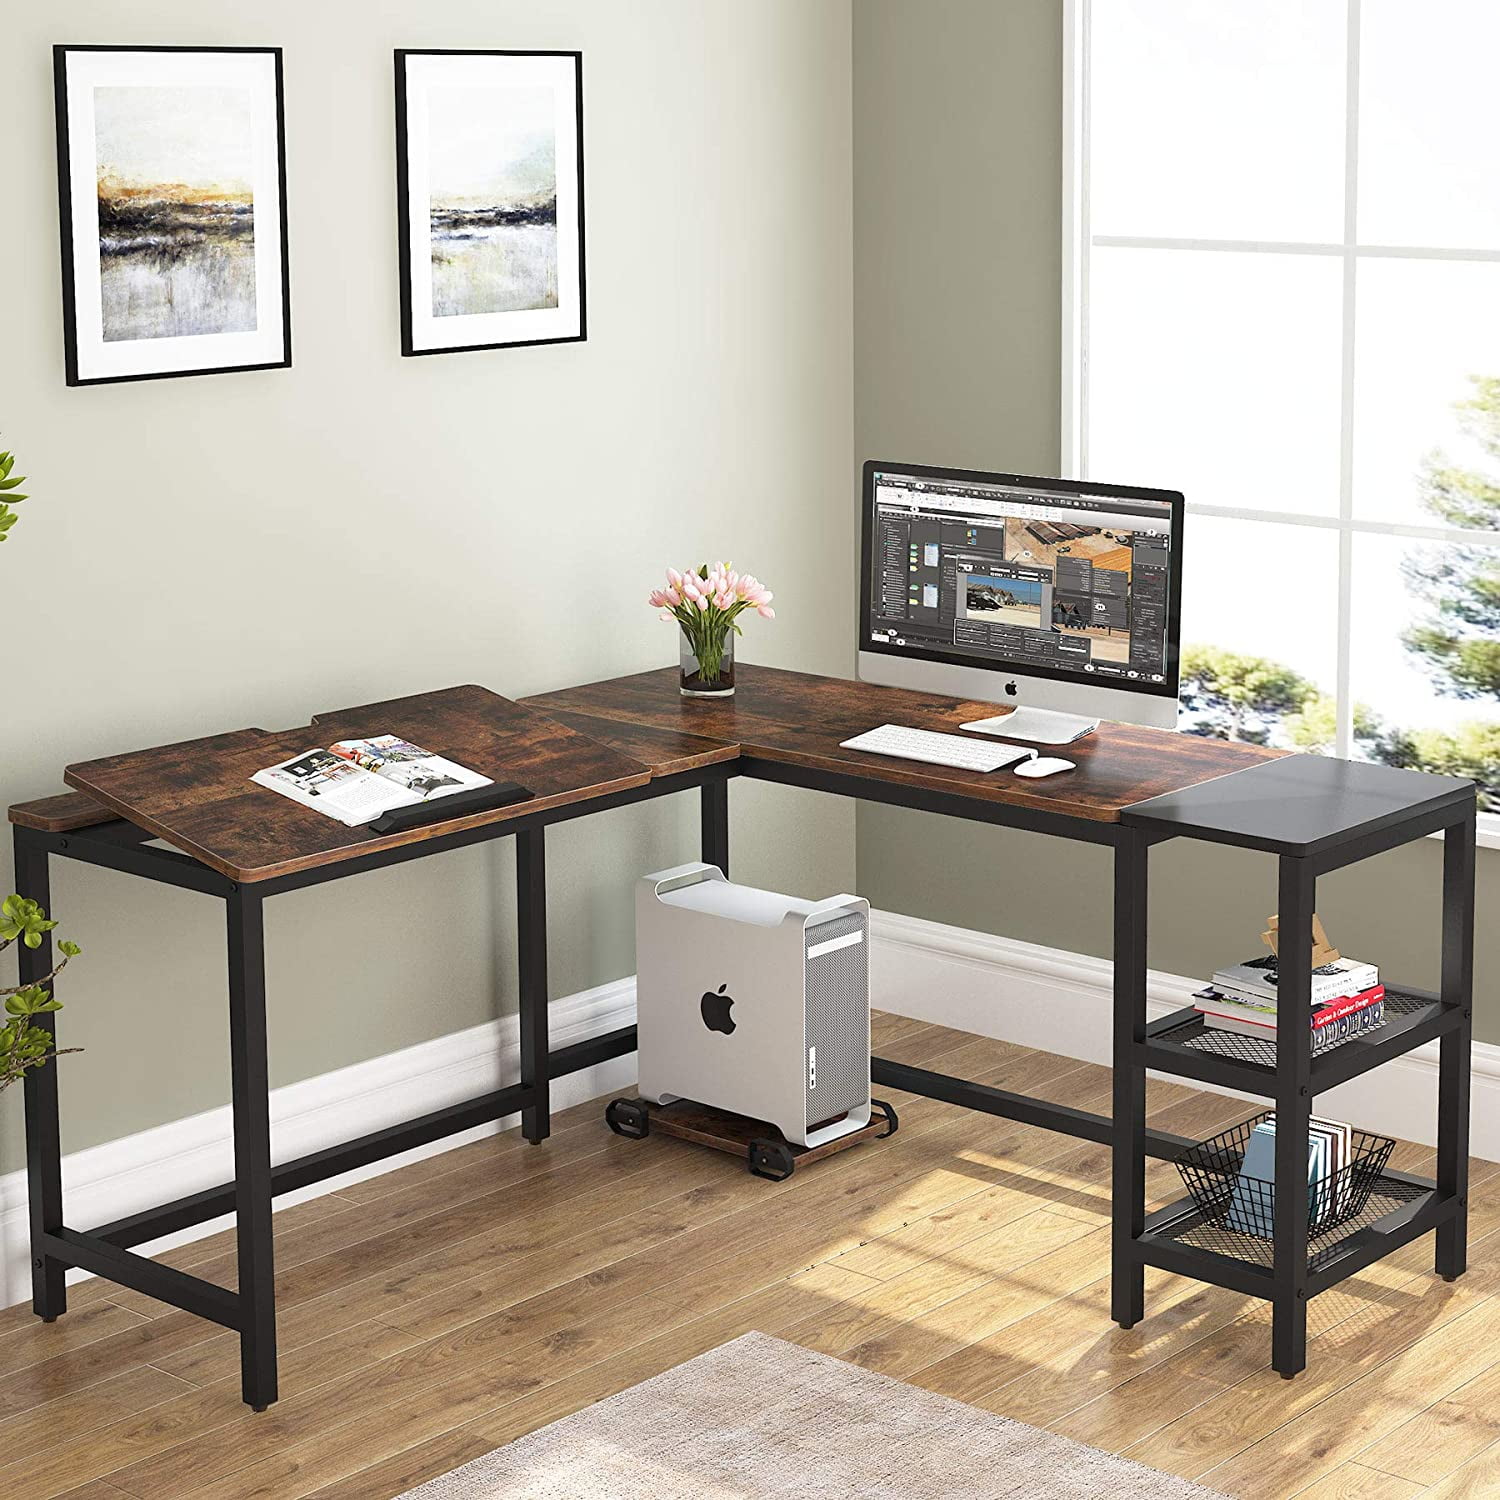 Tribesigns L Shaped Desk With Storage, L Shaped Computer Desk With Drawers And Shelves